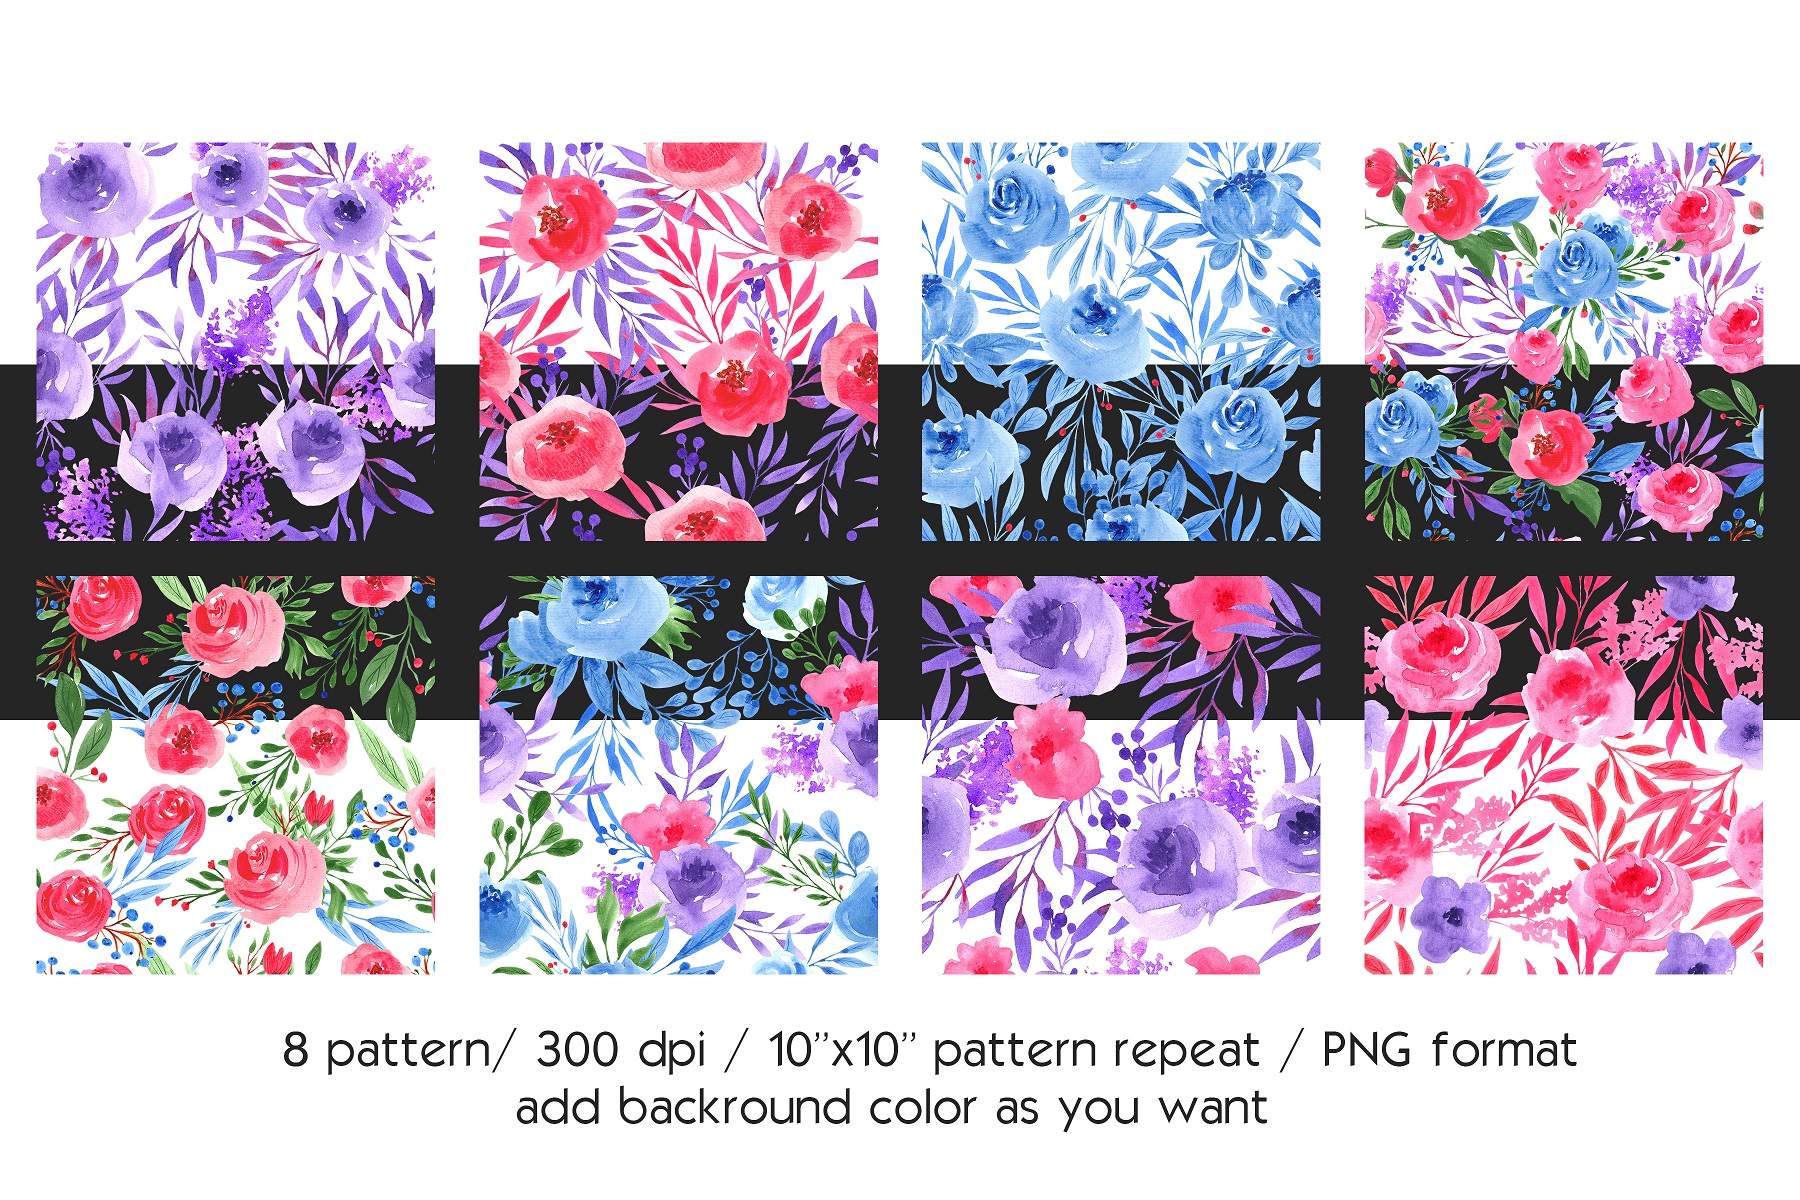 Collage of watercolor flowers on a black and white background.